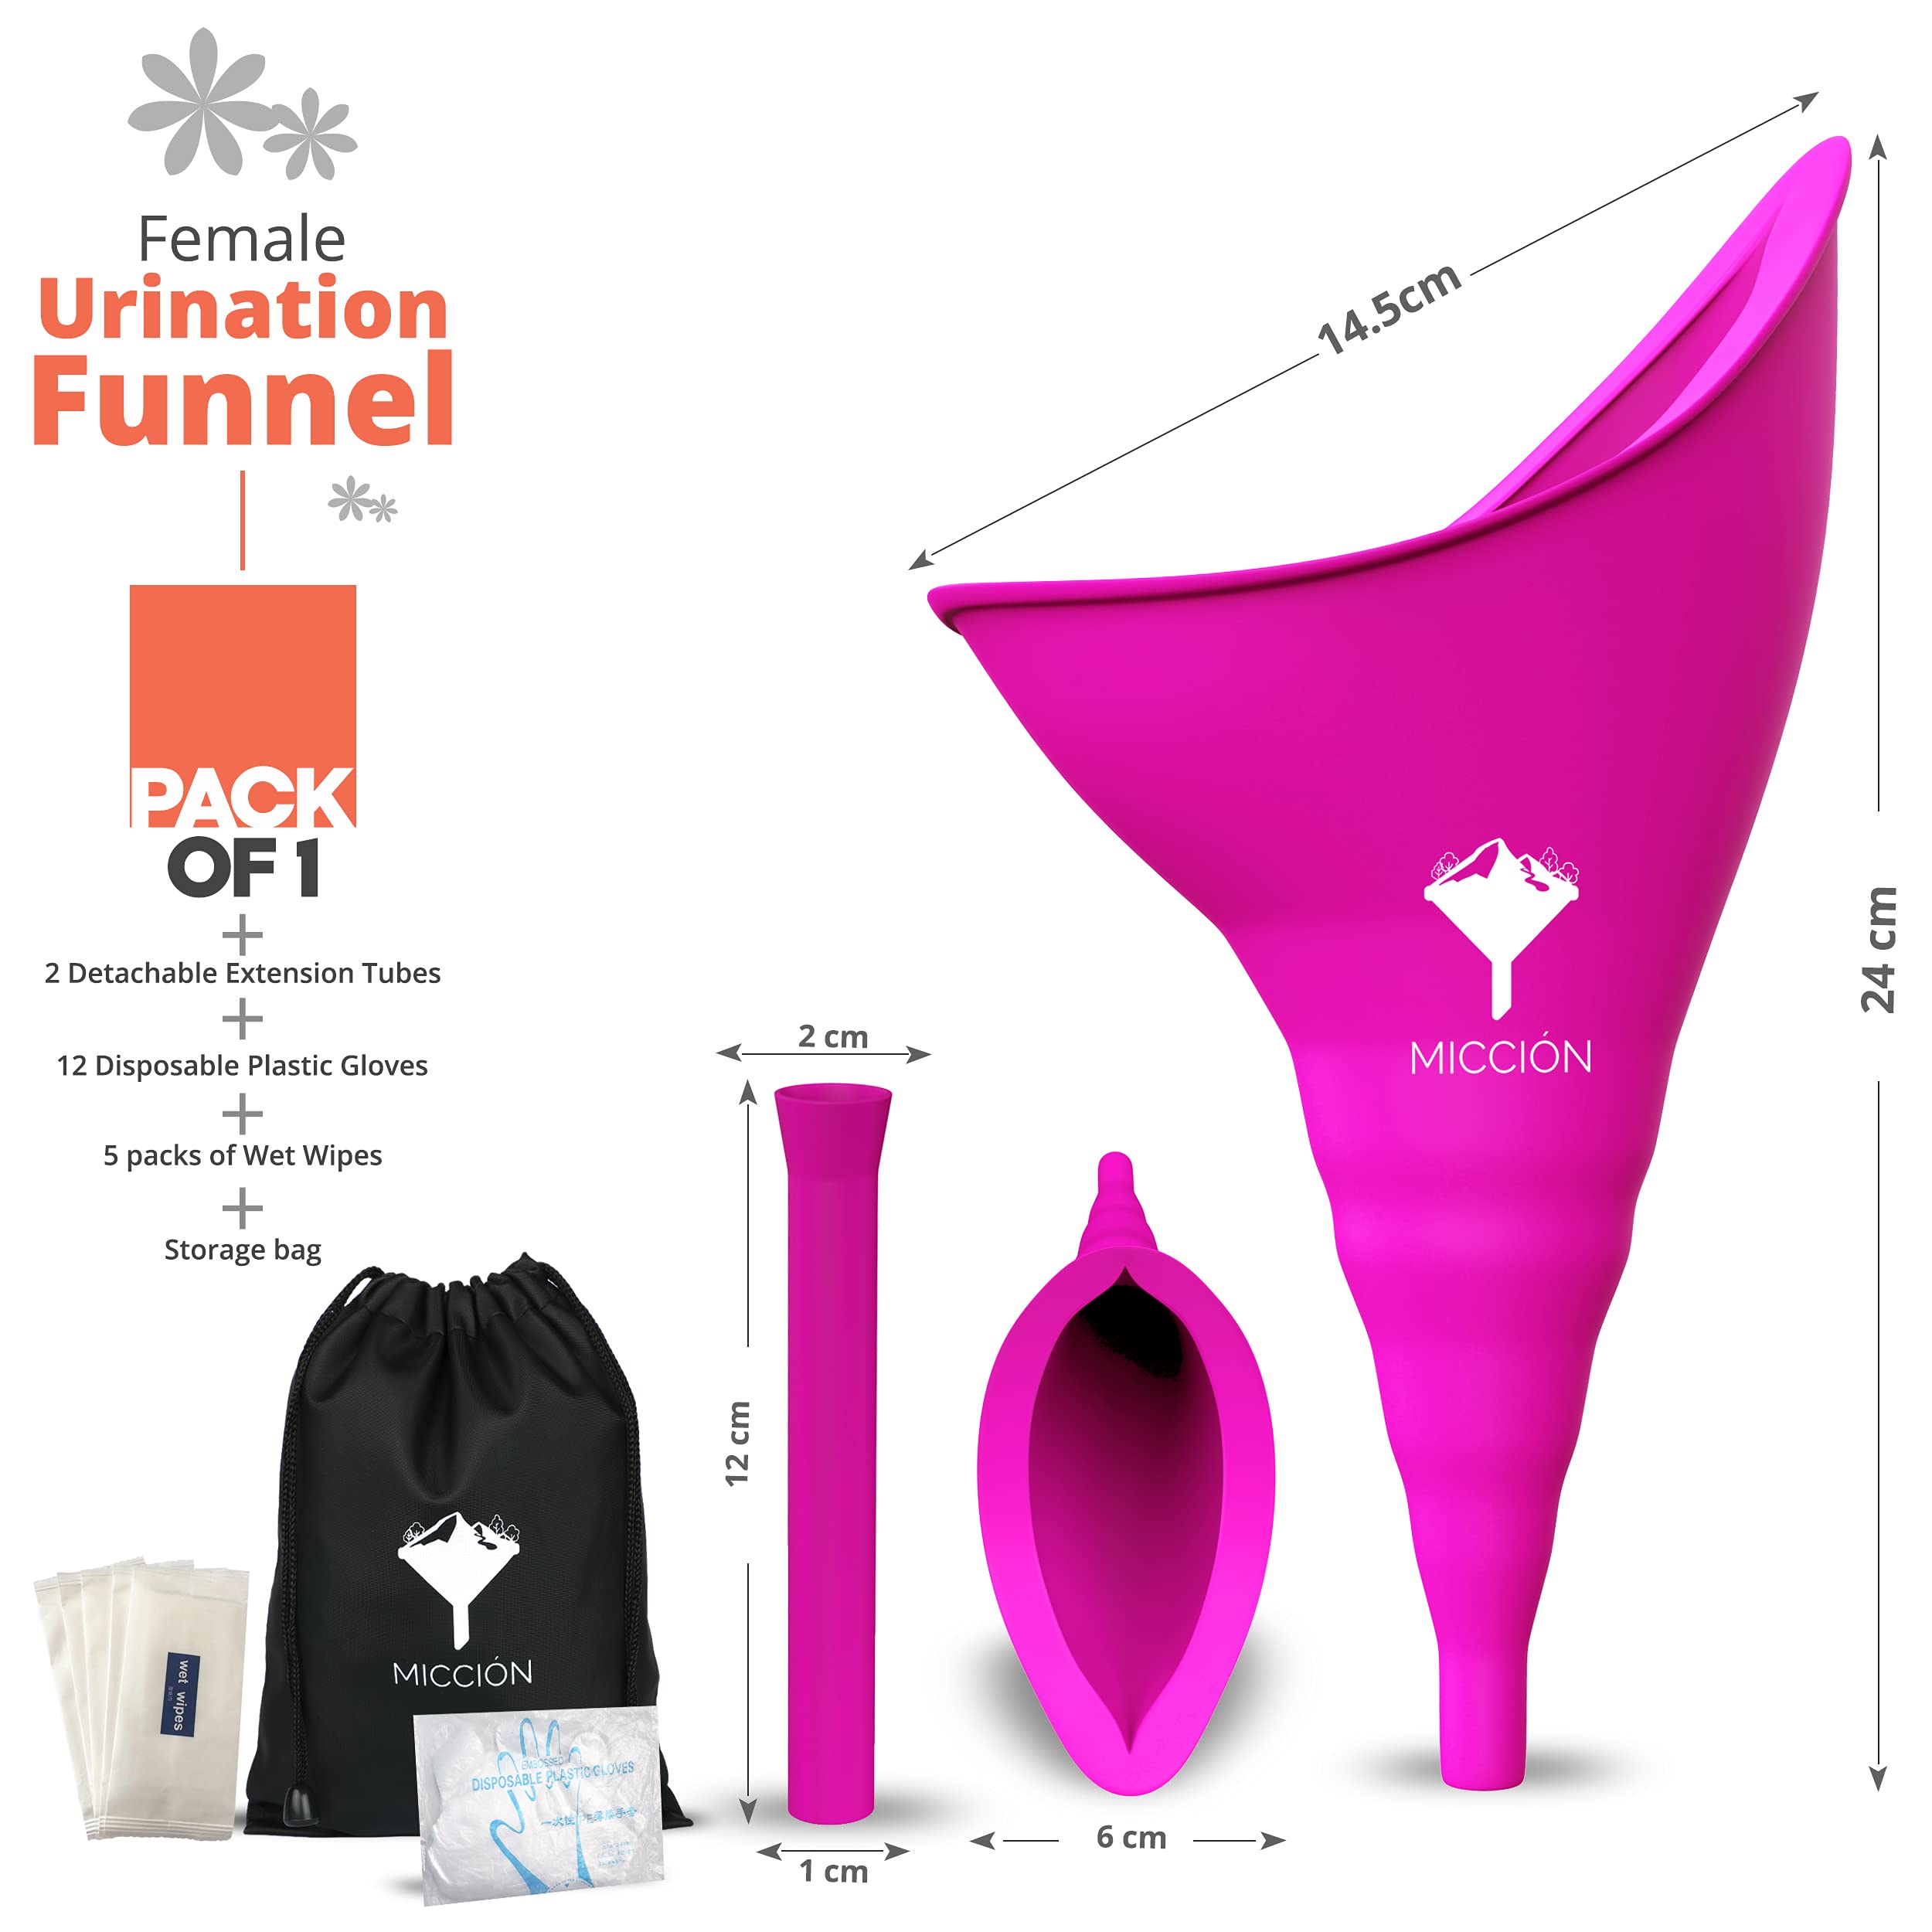 Portable Urinal and Reusable Female Urination Device - Silicone Pee Funnel for Women - Ideal for Car Camping, Road Trips, Hiking, and Outdoor Adventures - Stay Comfortable and Hygienic Anywhere You Go